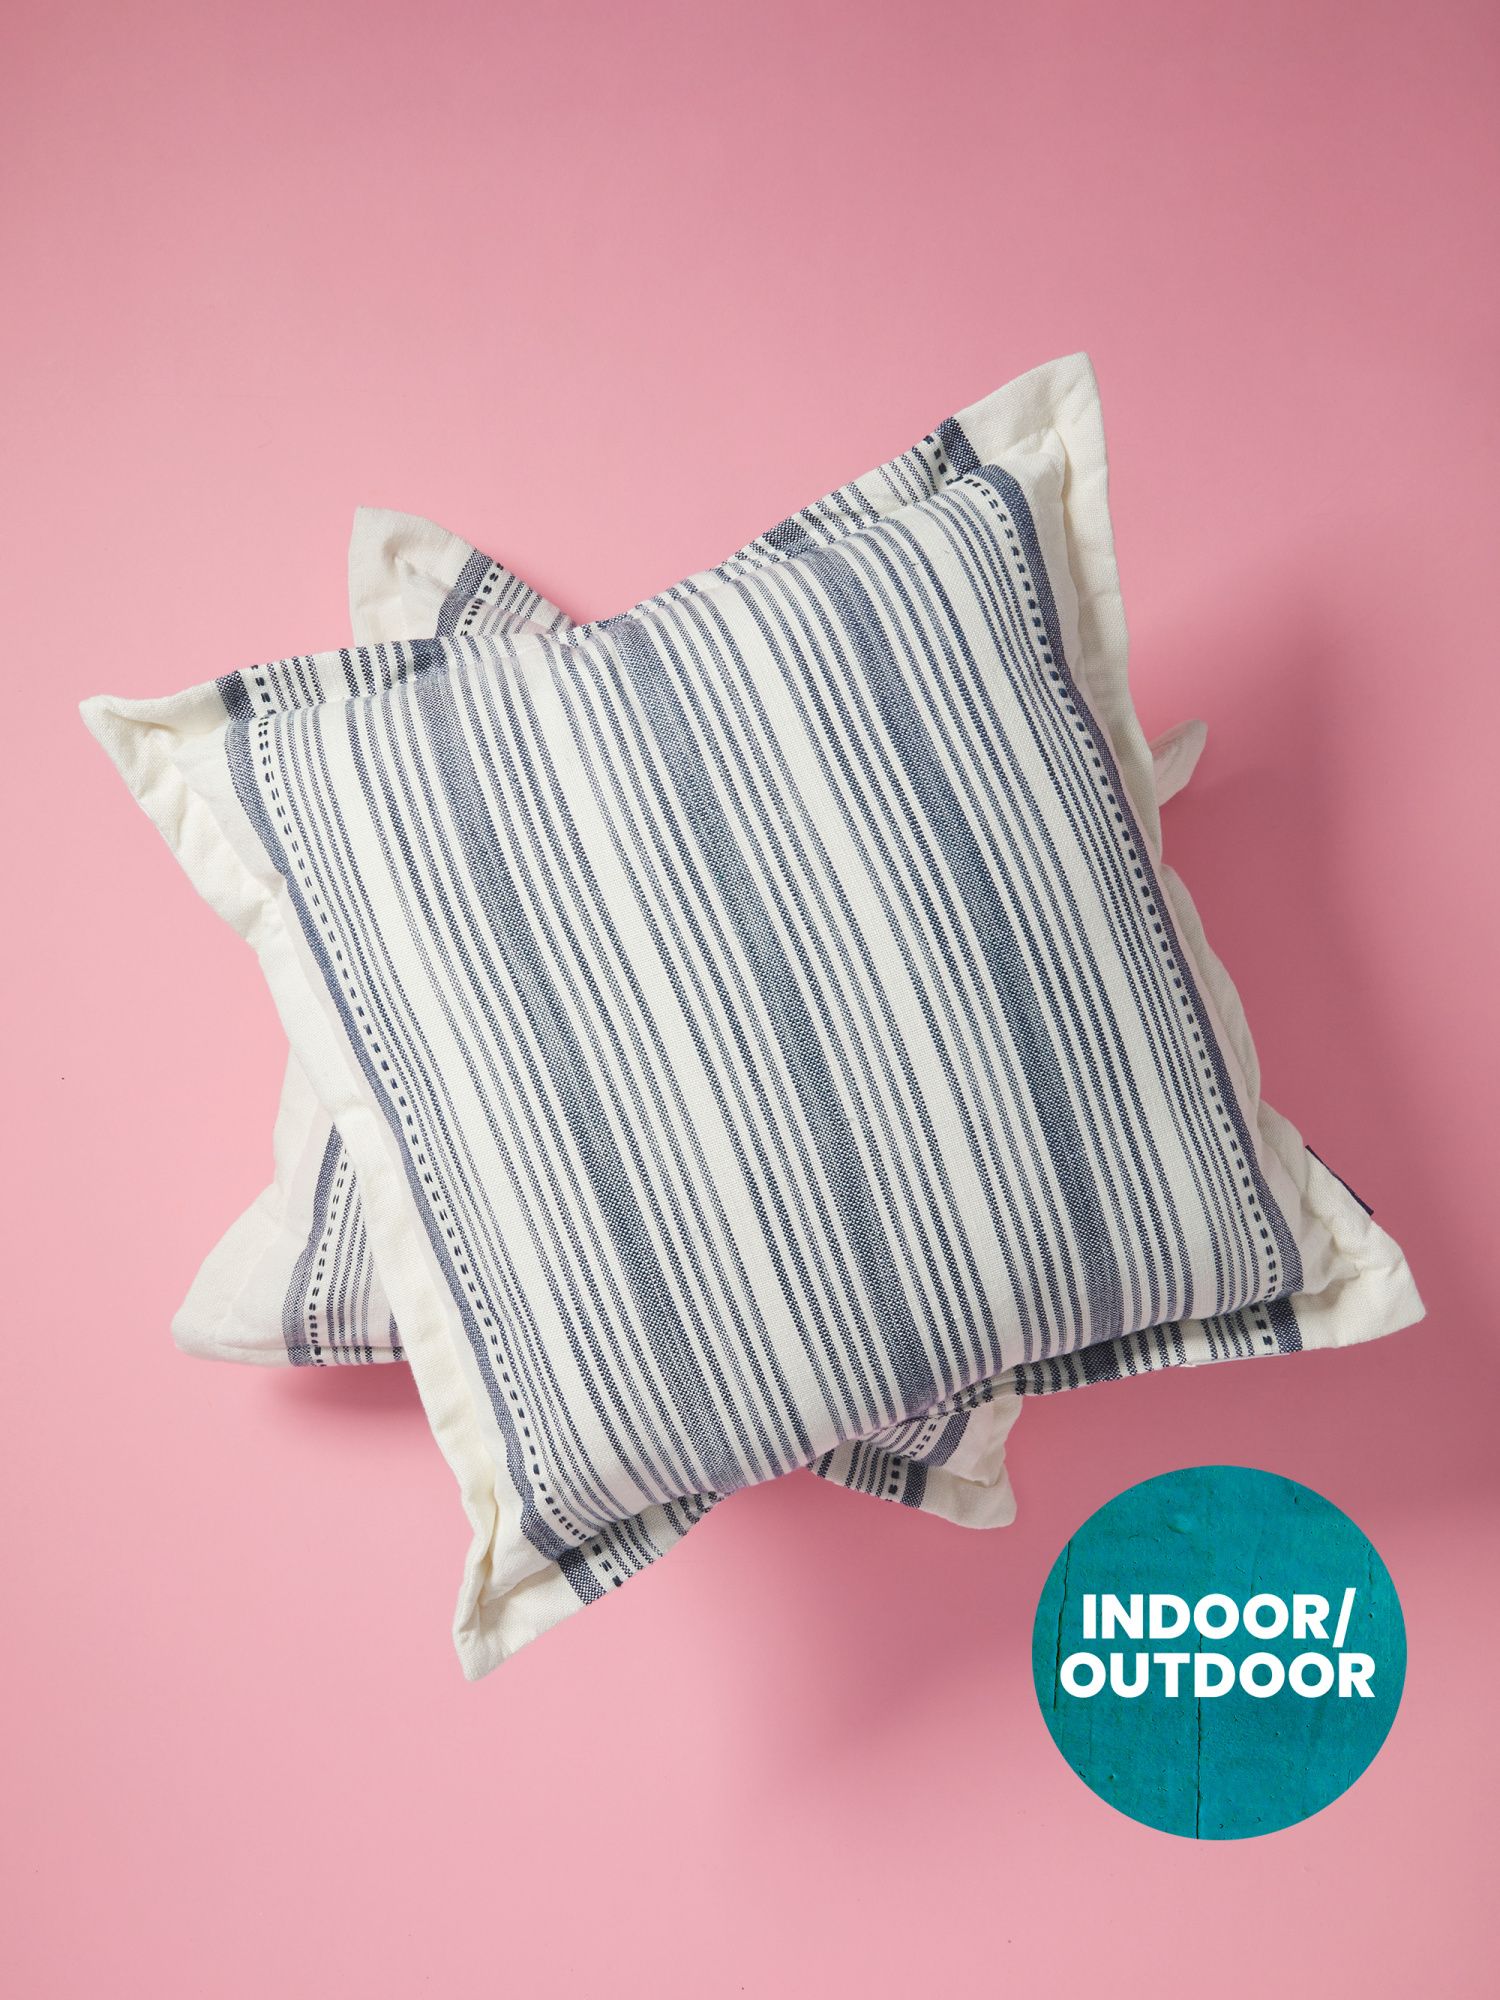 Made In India 2pk 18x18 Indoor Outdoor Striped Pillows | Outdoor Pillows | HomeGoods | HomeGoods